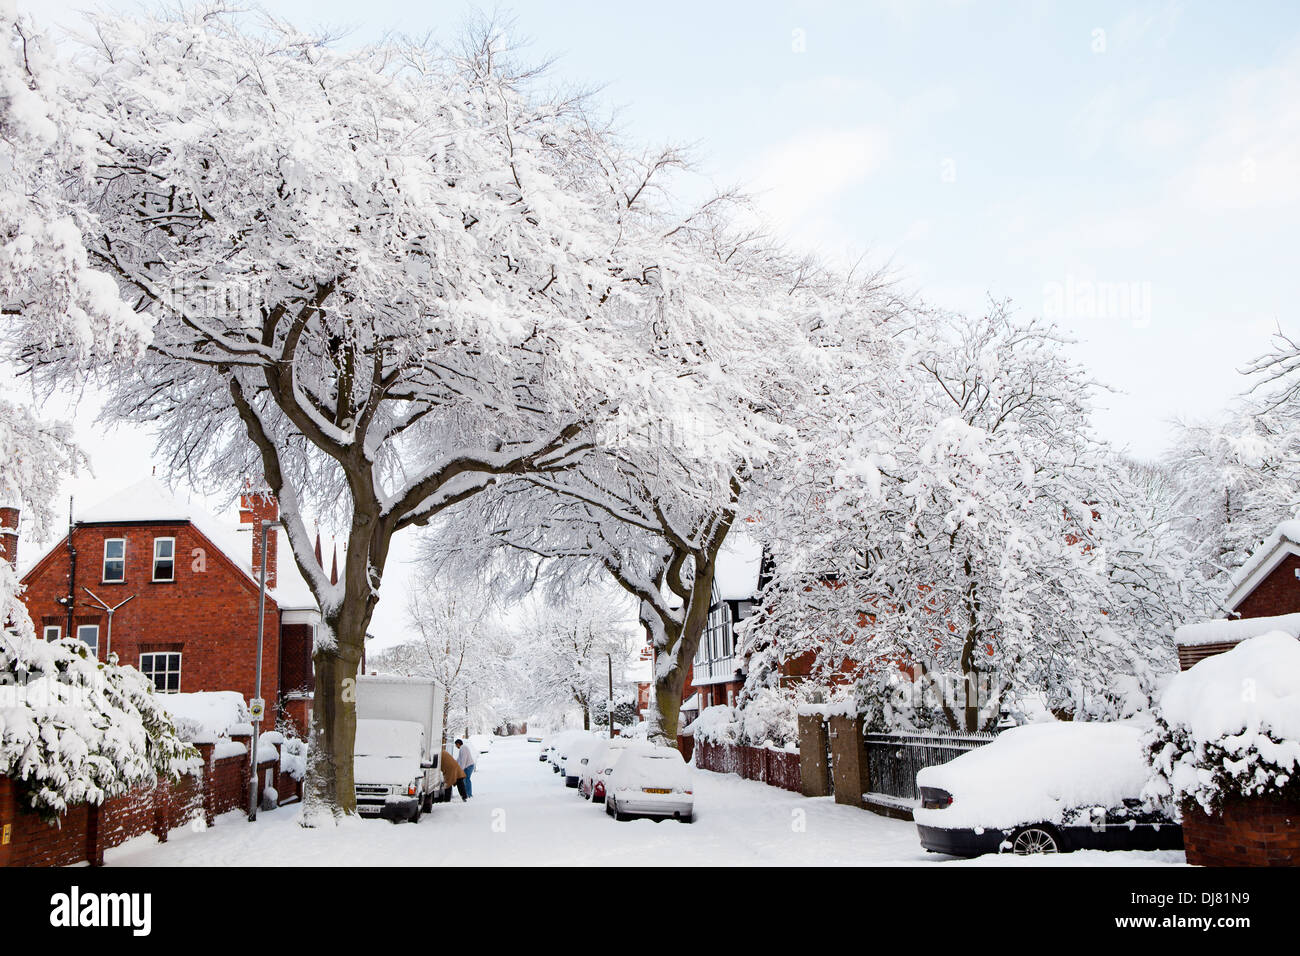 A residential road/street in Lincoln, Lincolnshire, covered in snow after a heavy snowfall Stock Photo